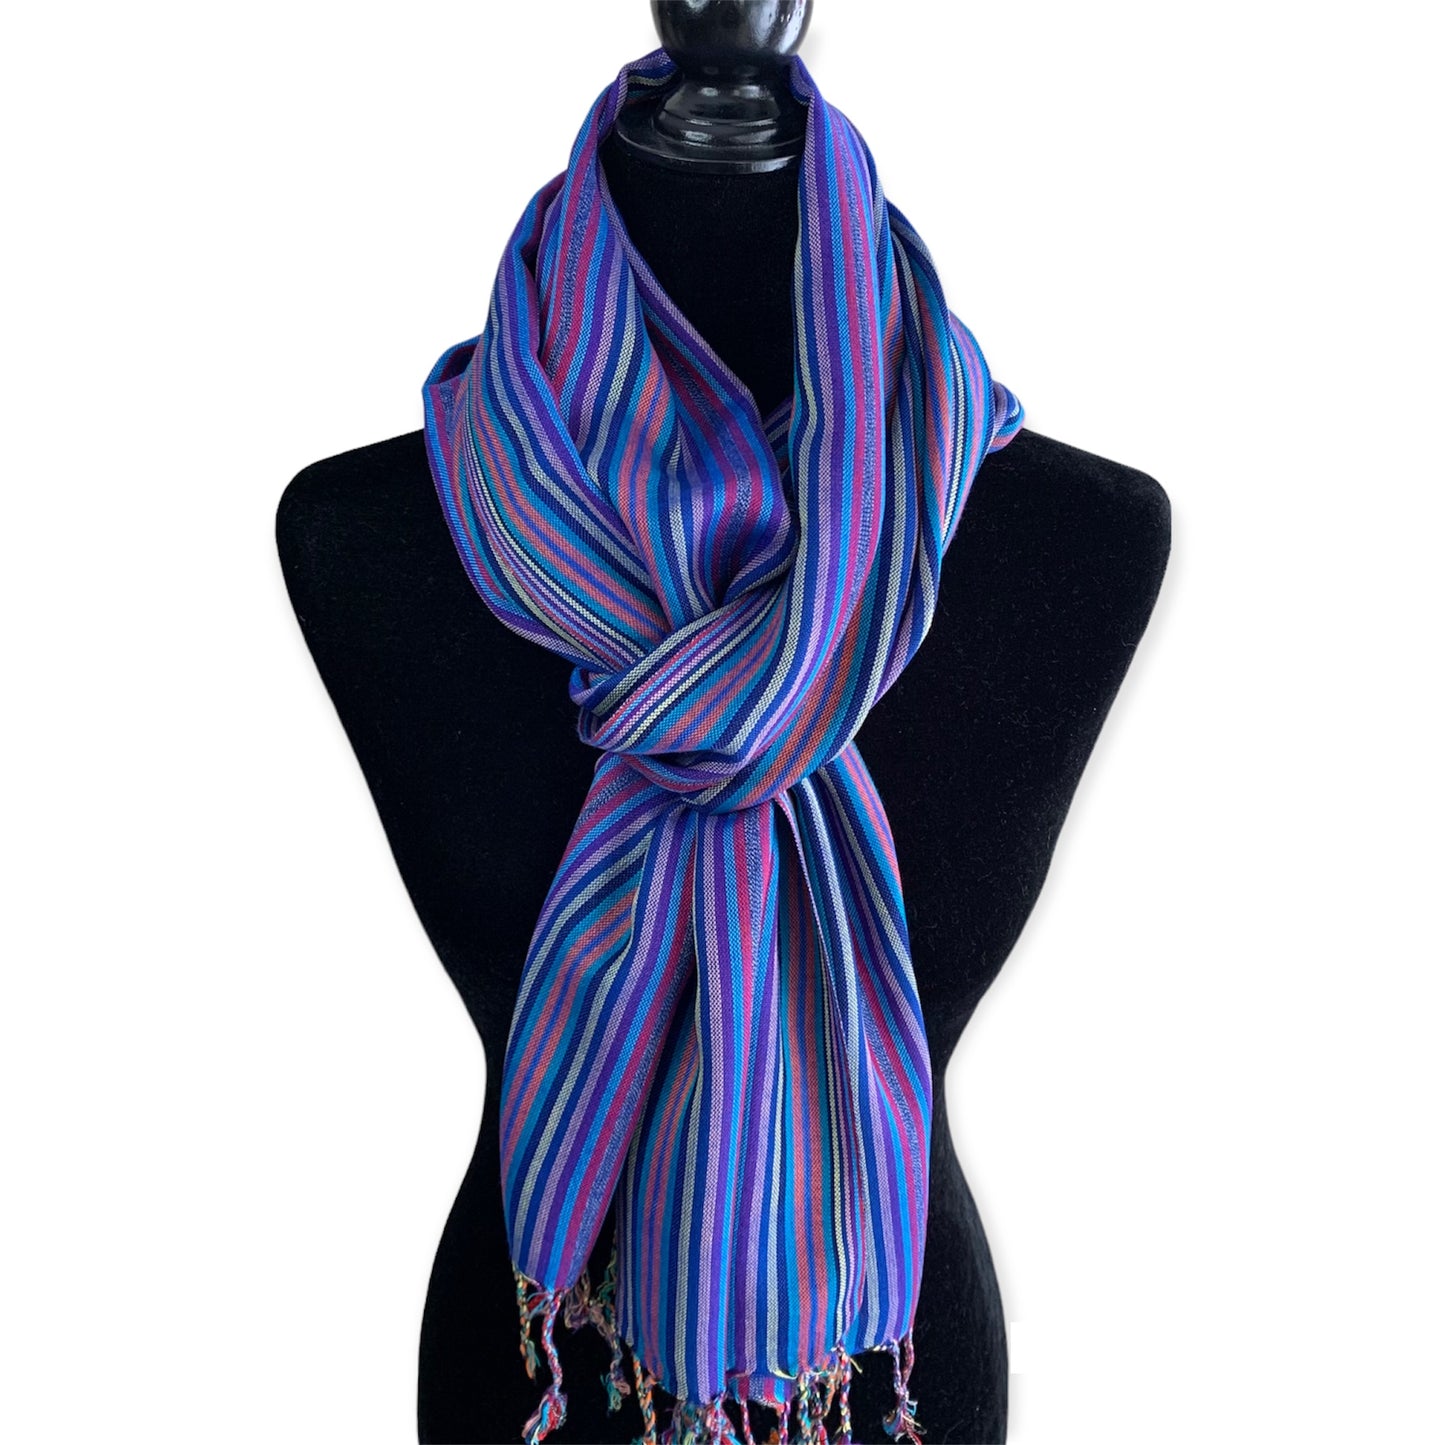 Thin Striped Handwoven Bamboo Viscose Scarf - Shades of Blue